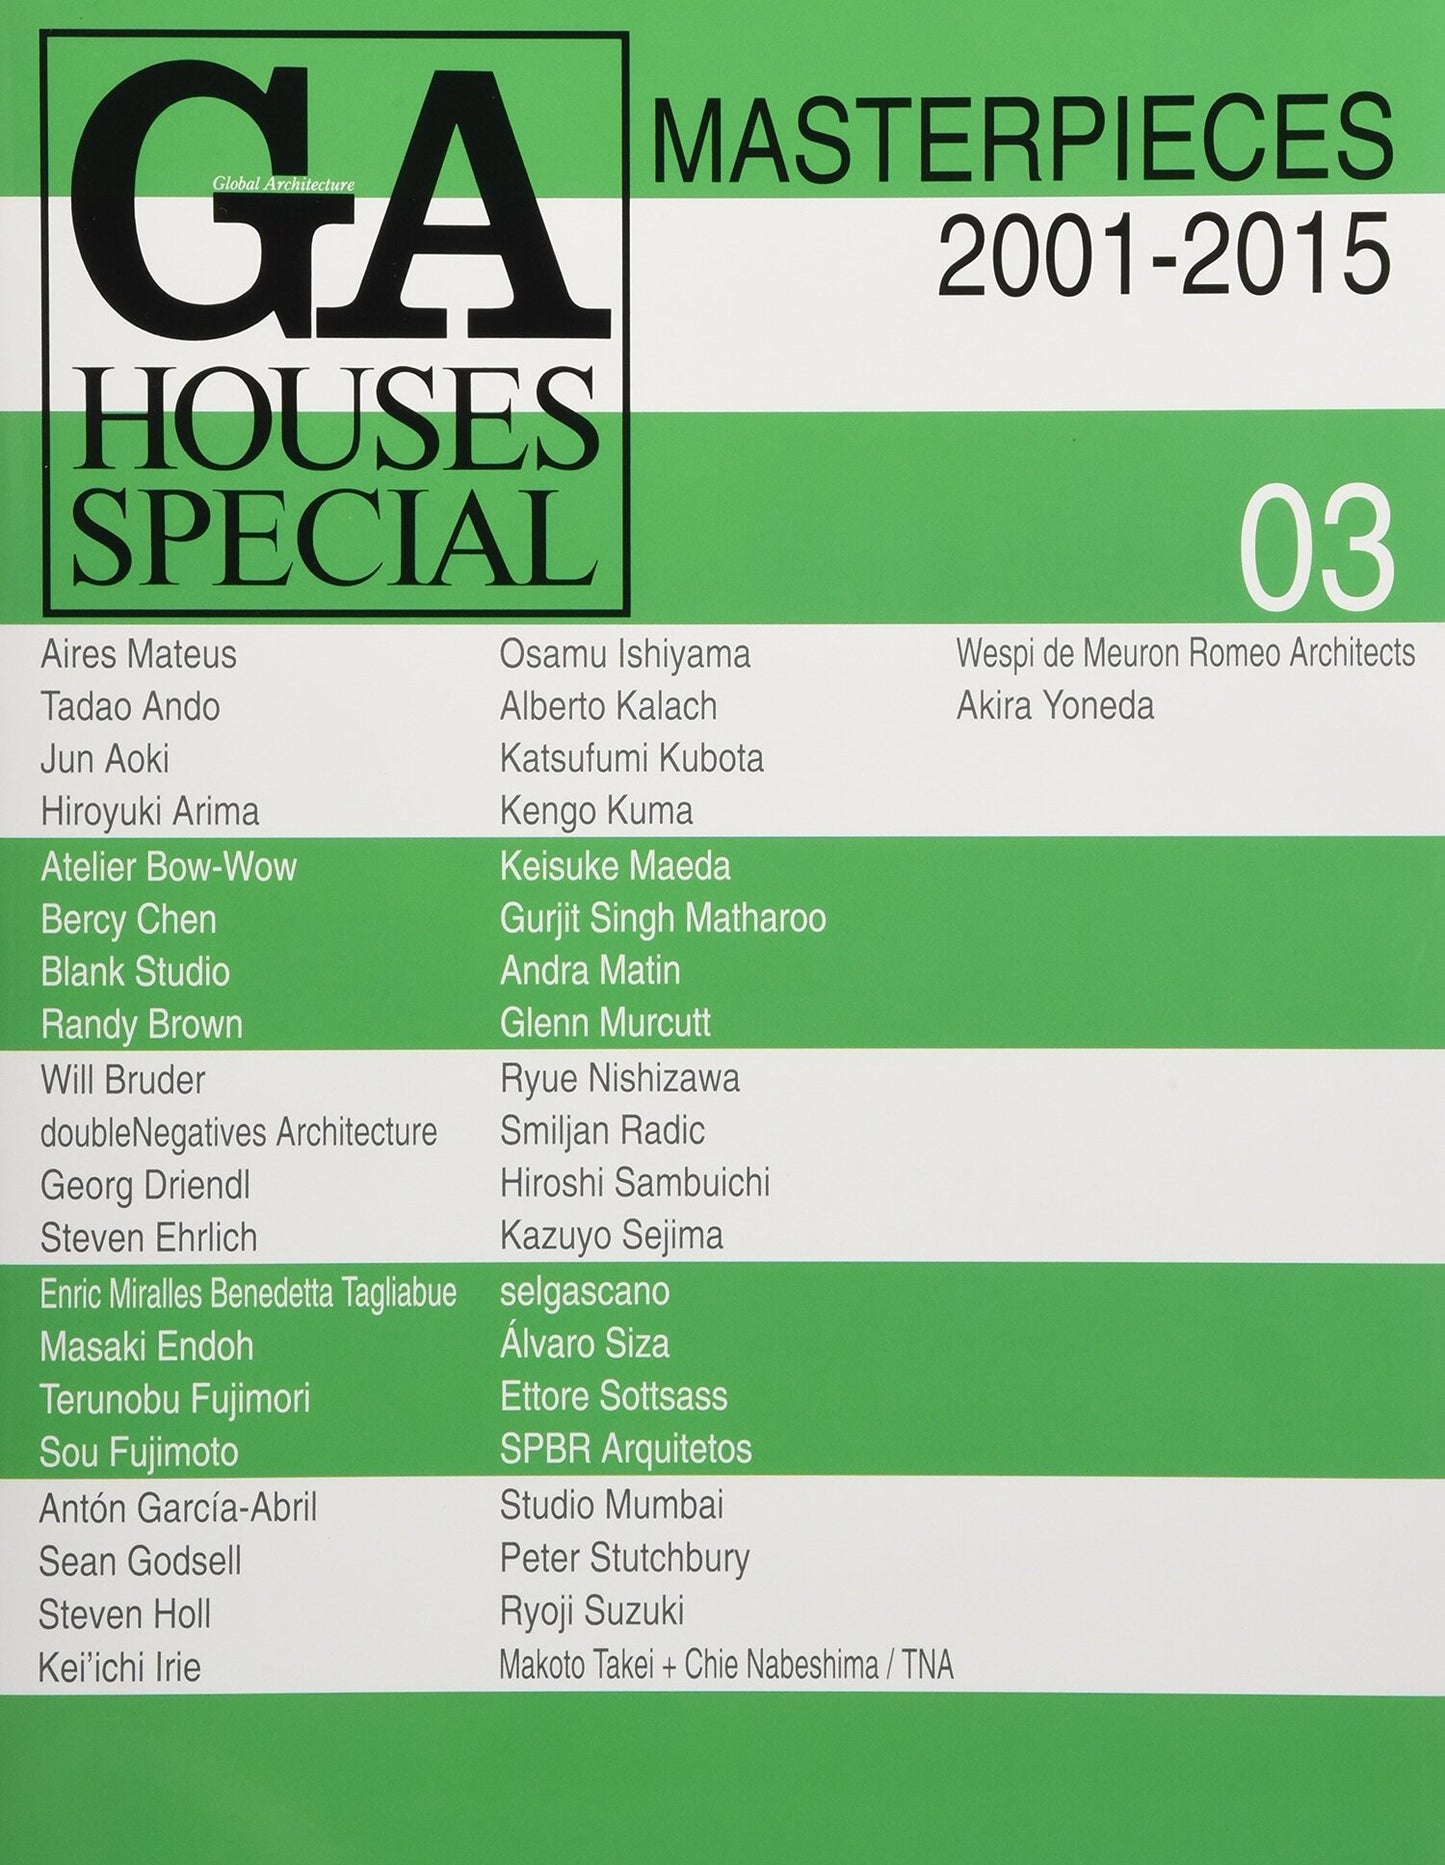 GA Houses Special 03: Masterpieces 2001-2015